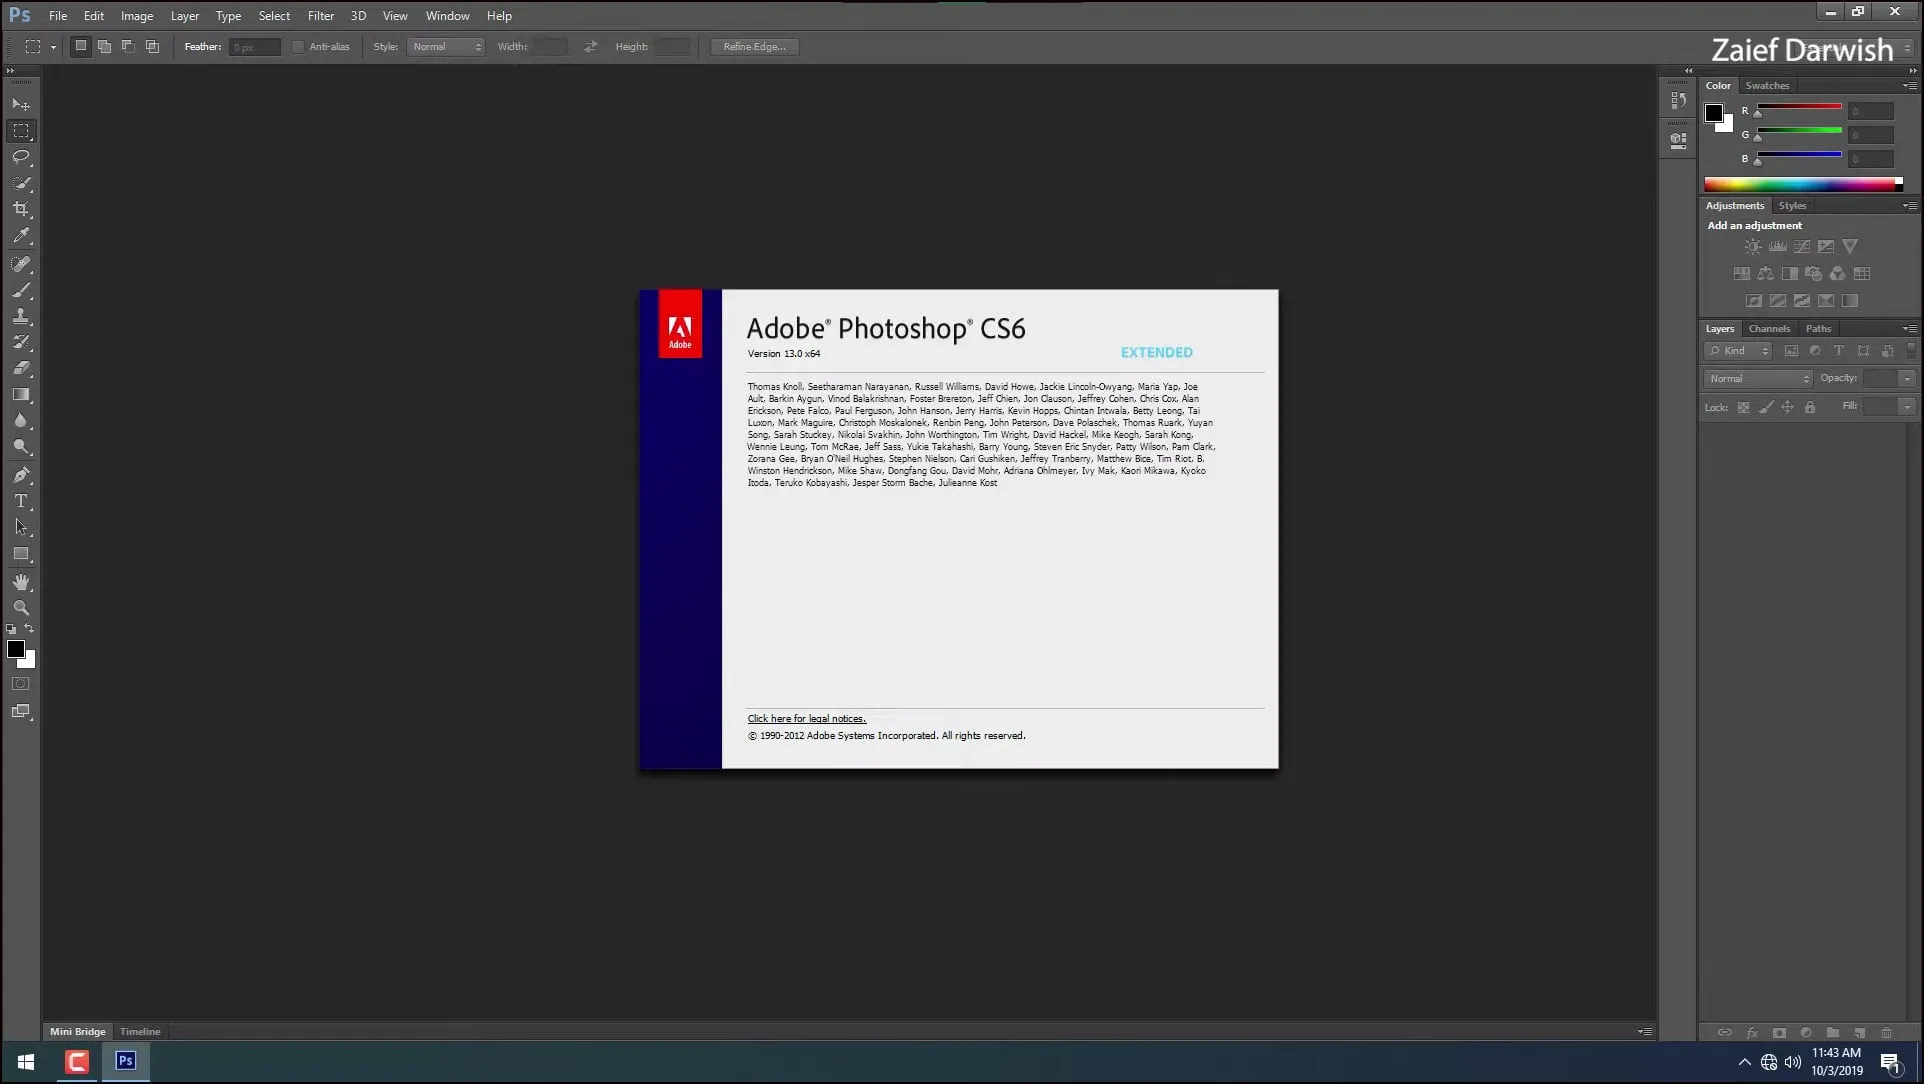 Adobe Photoshop CS6 Activated Full Version Free Download